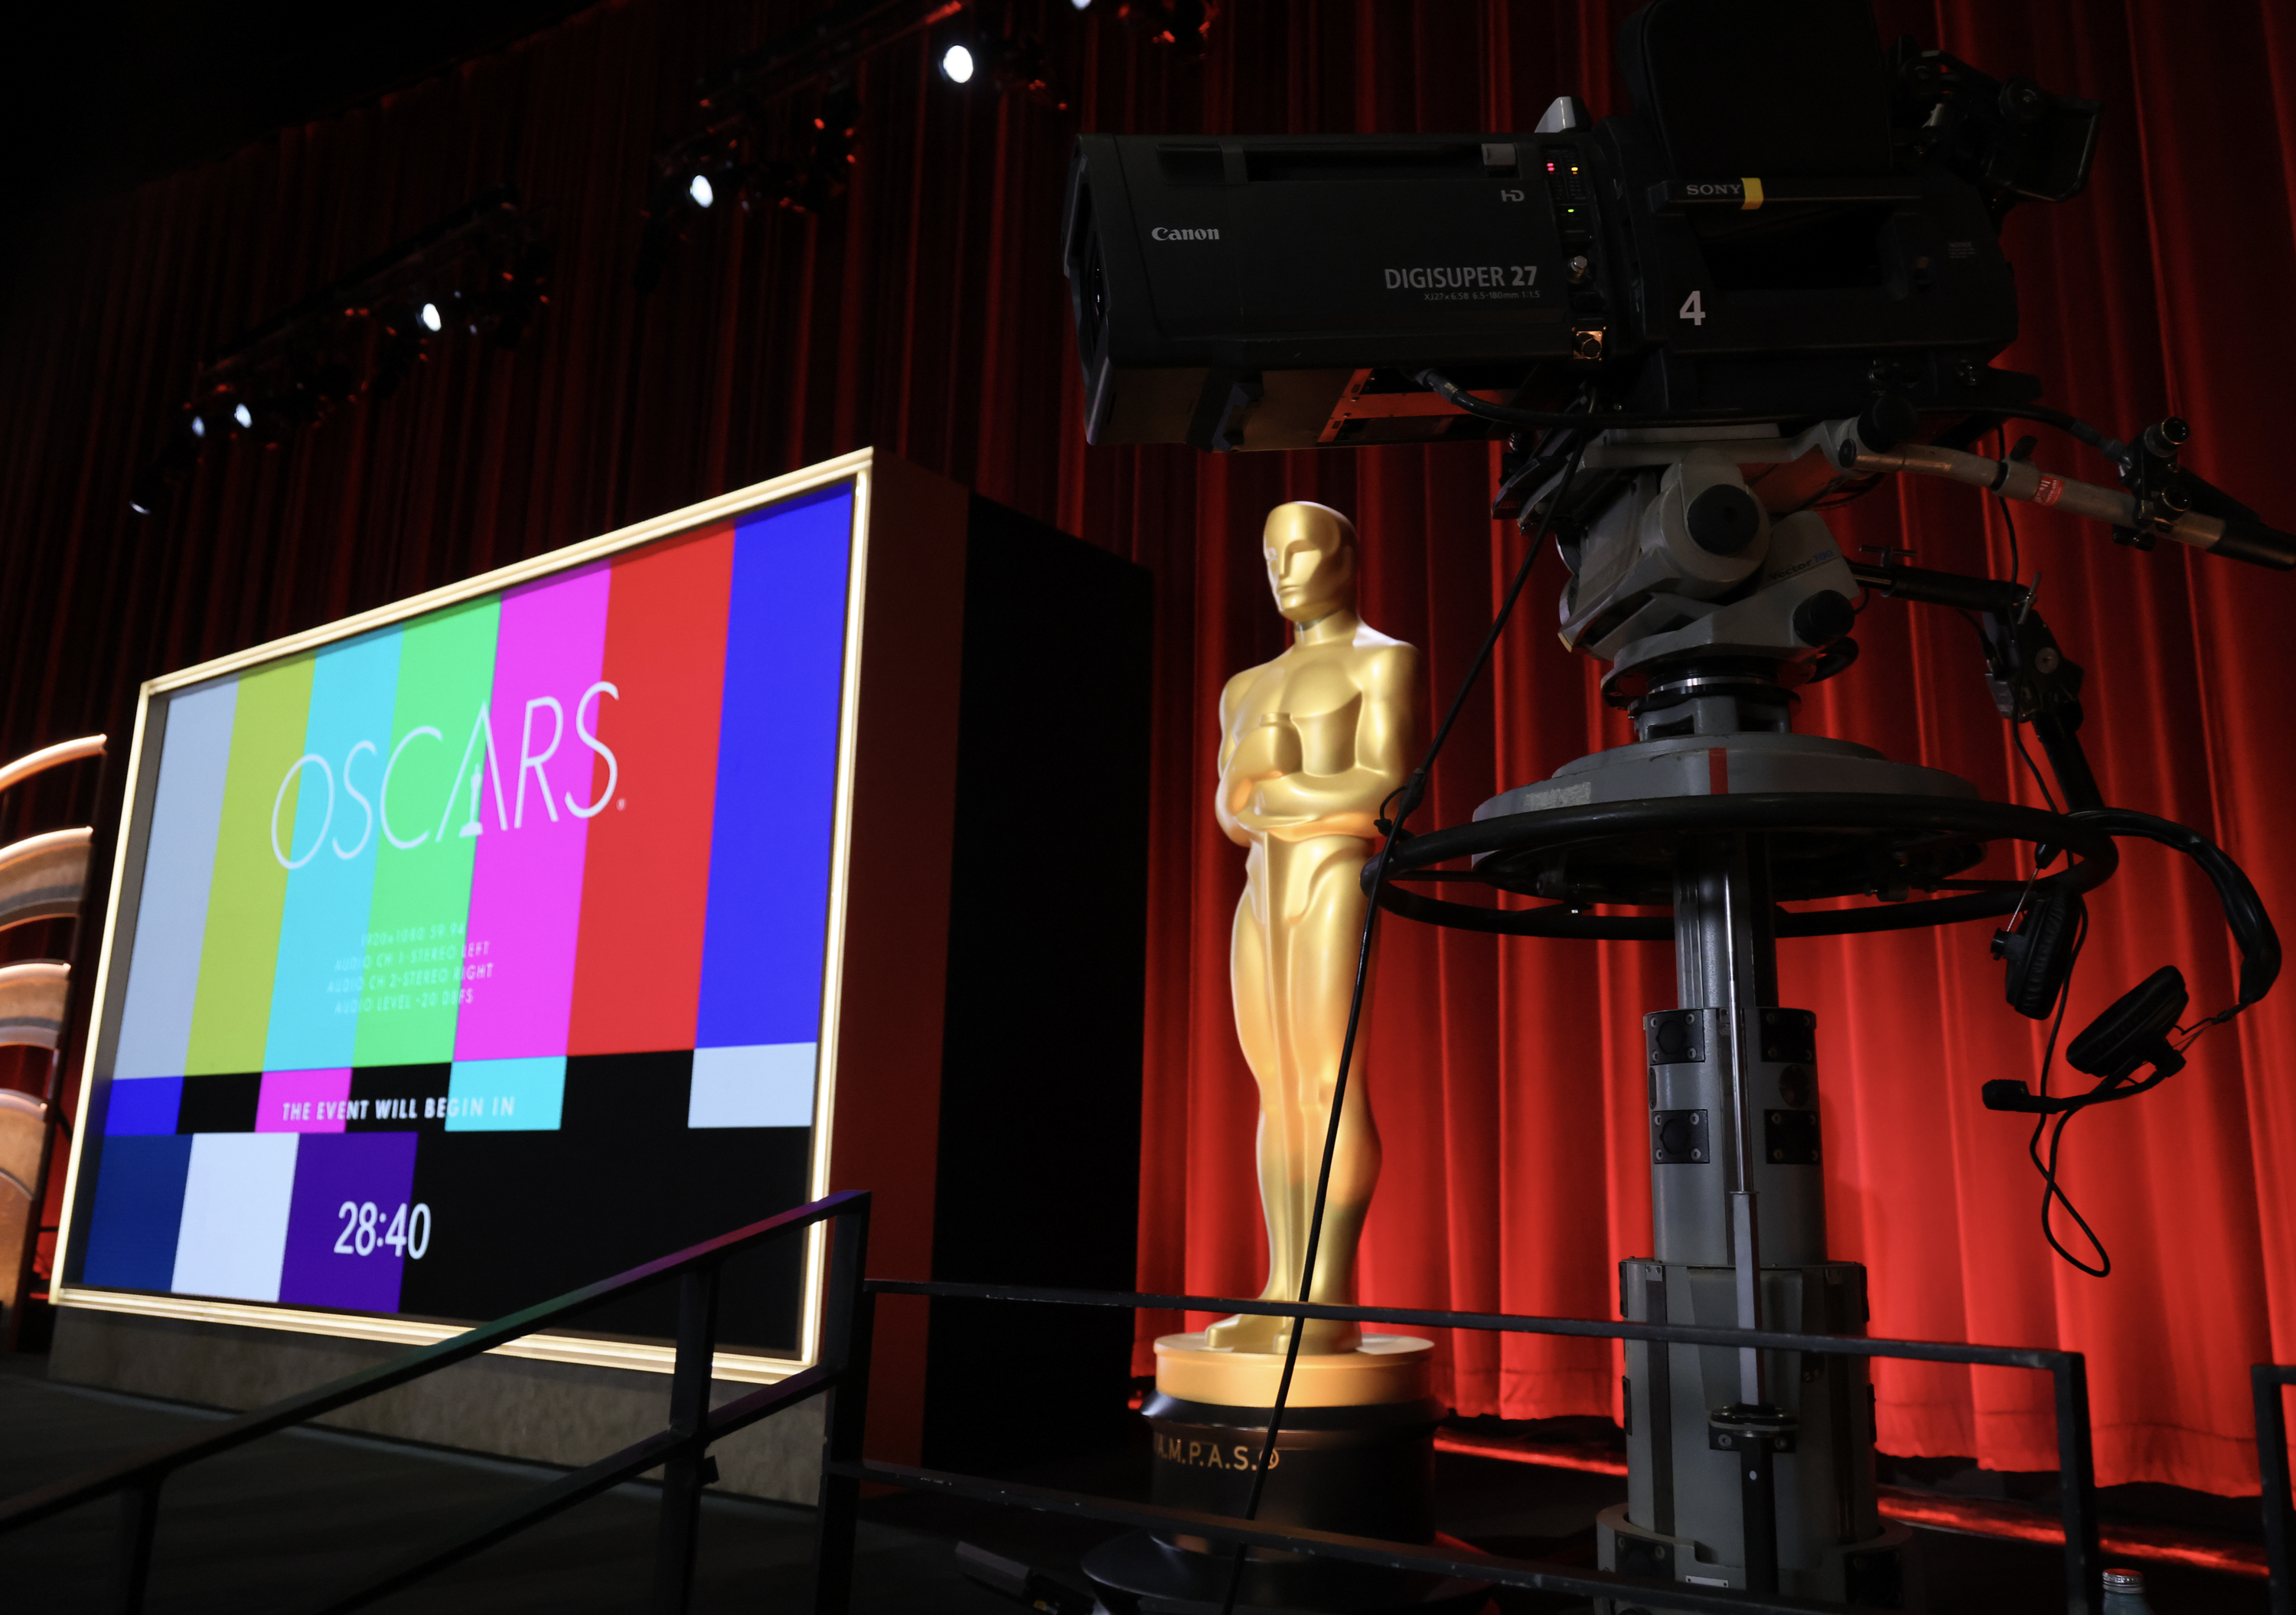 the large oscars statue on the stage